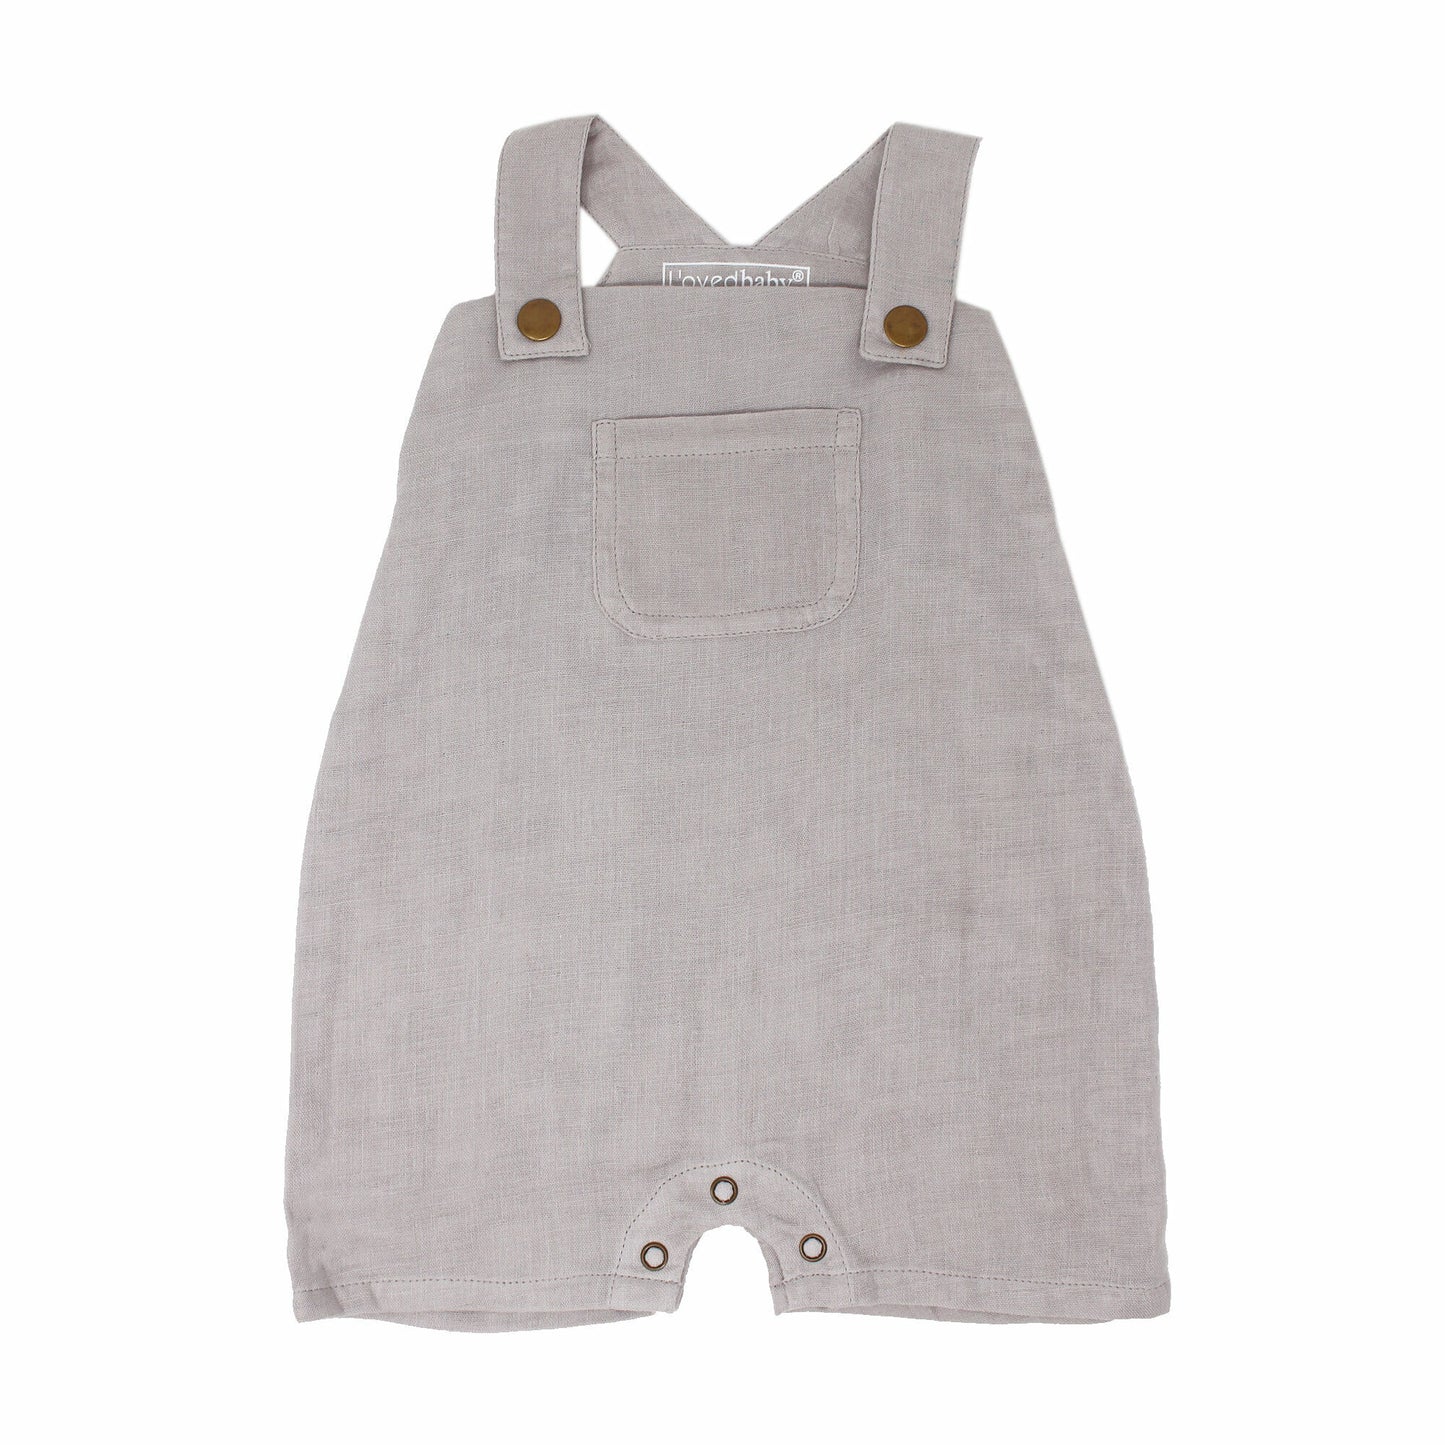 L'oved Baby Muslin Overalls